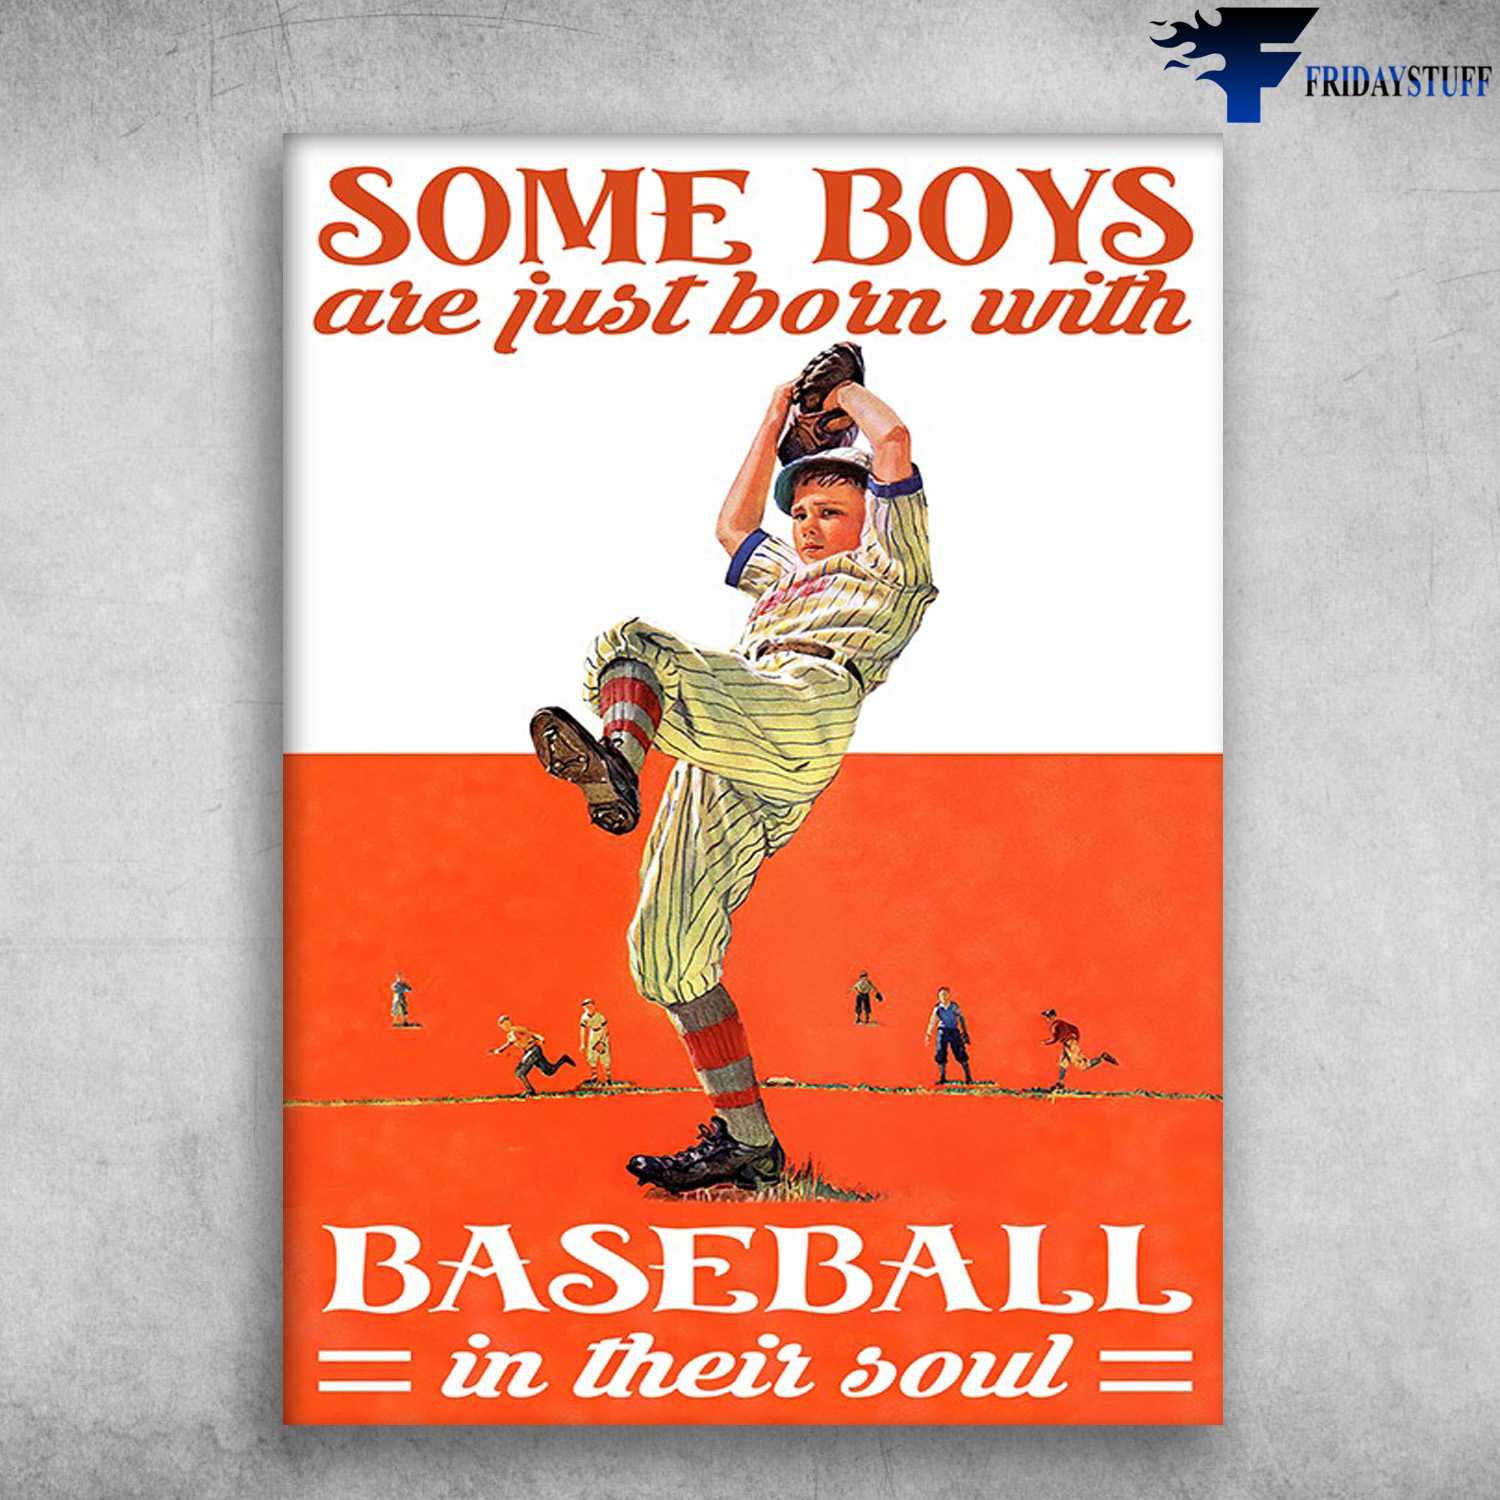 Baseball Lover, Baseball Boy - Some Boys Are Just Born With Baseball, In Their Soul